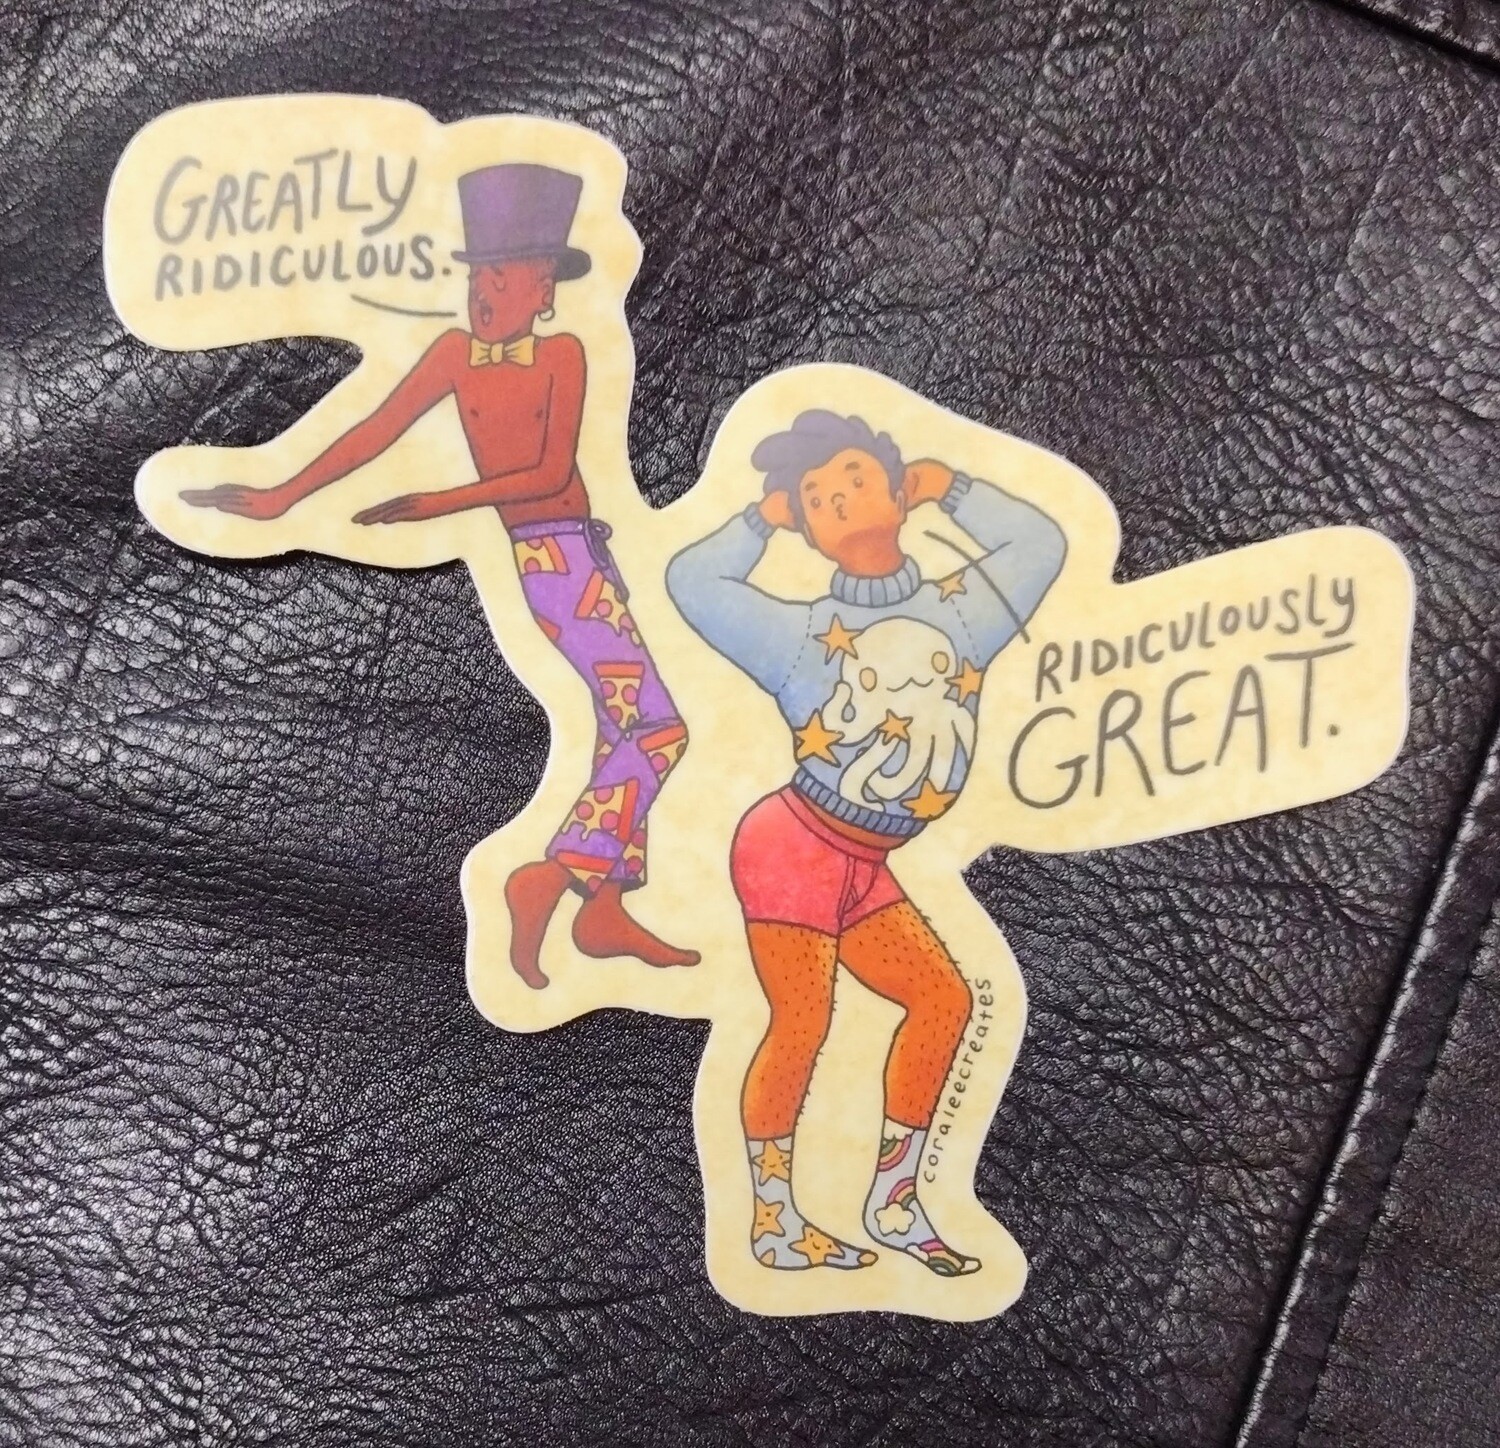 Greatly Ridiculous - Sticker by Cora Lee